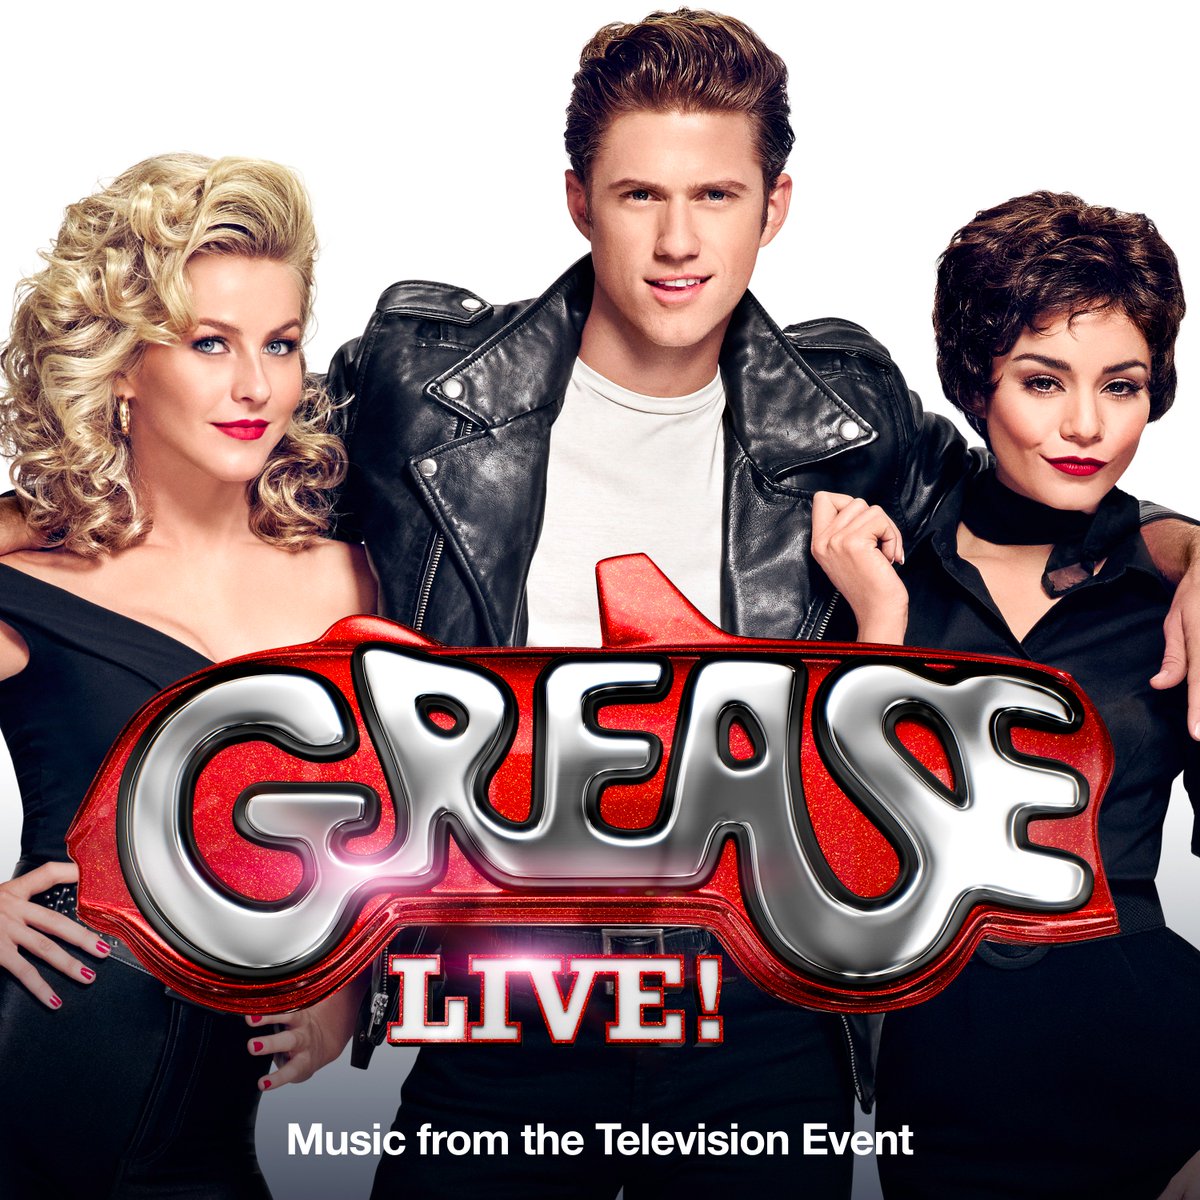 RT @RepublicRecords: Pre-order the #GoGrease soundtrack on #iTunes & get @JessieJ's GREASE IS THE WORD instantly! https://t.co/TTDwyyIa2x h…